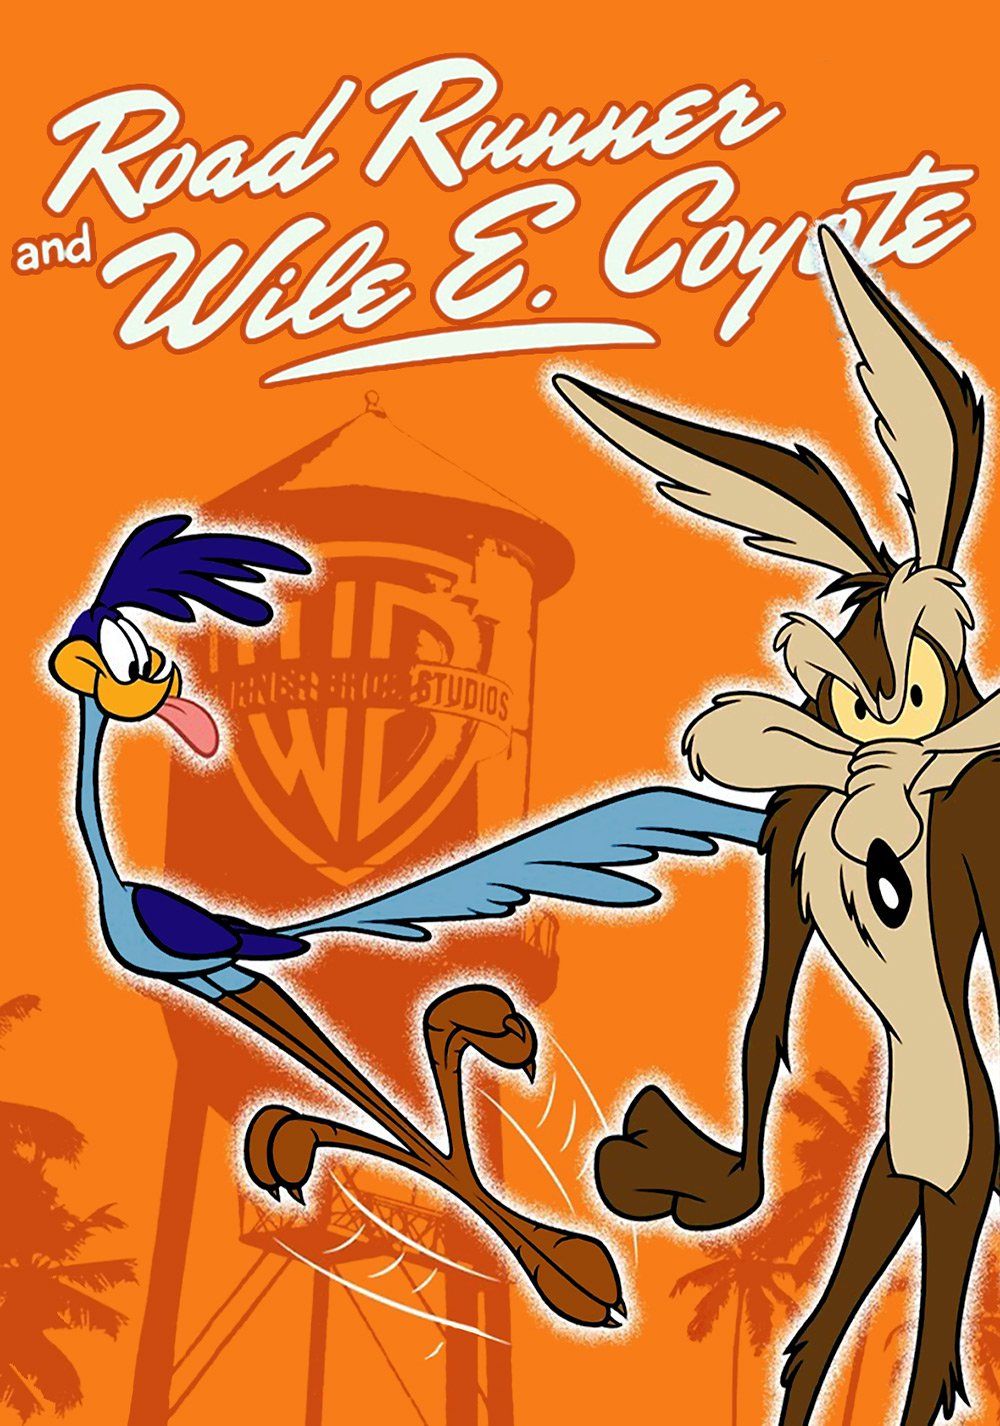 Wile E. Coyote And The Road Runner wallpaper, Cartoon, HQ Wile E